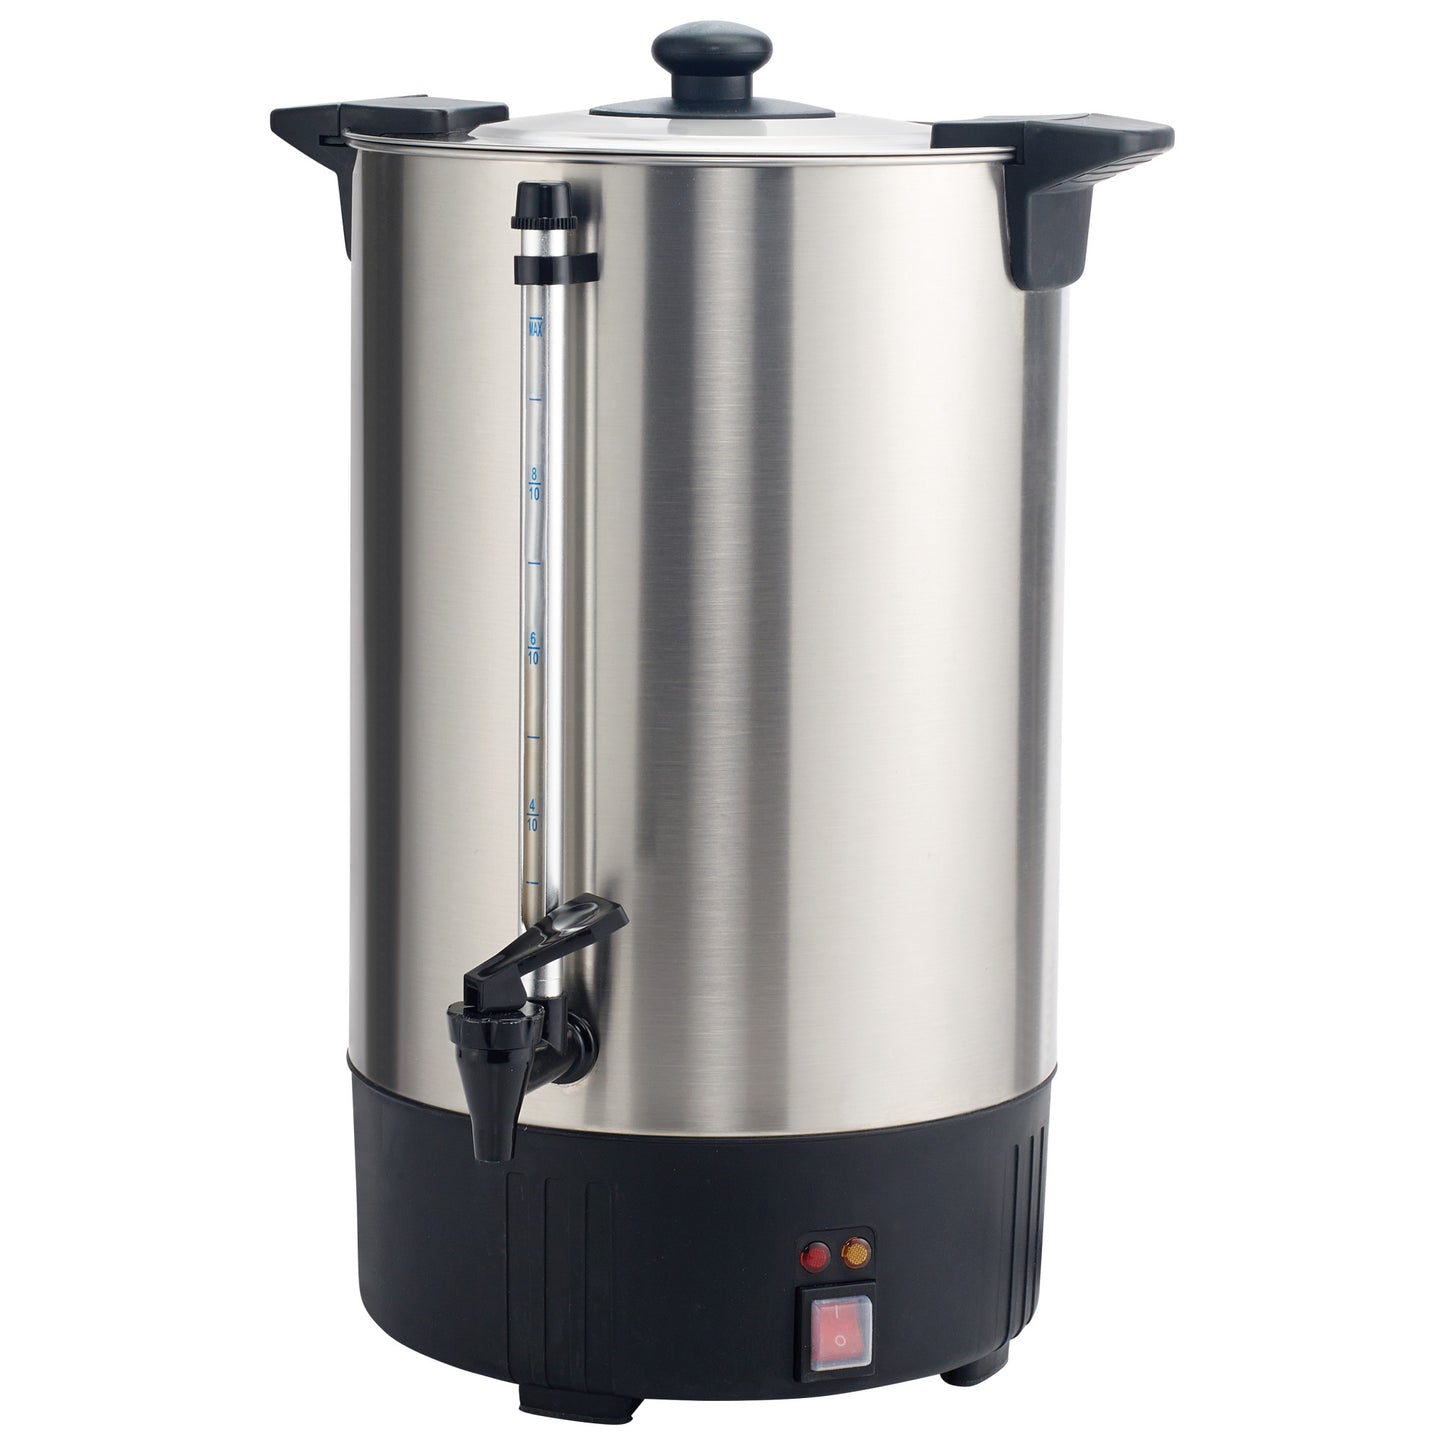 EWB-100A - Electric Stainless Steel Water Boiler - 4.2 Gallon (16L)